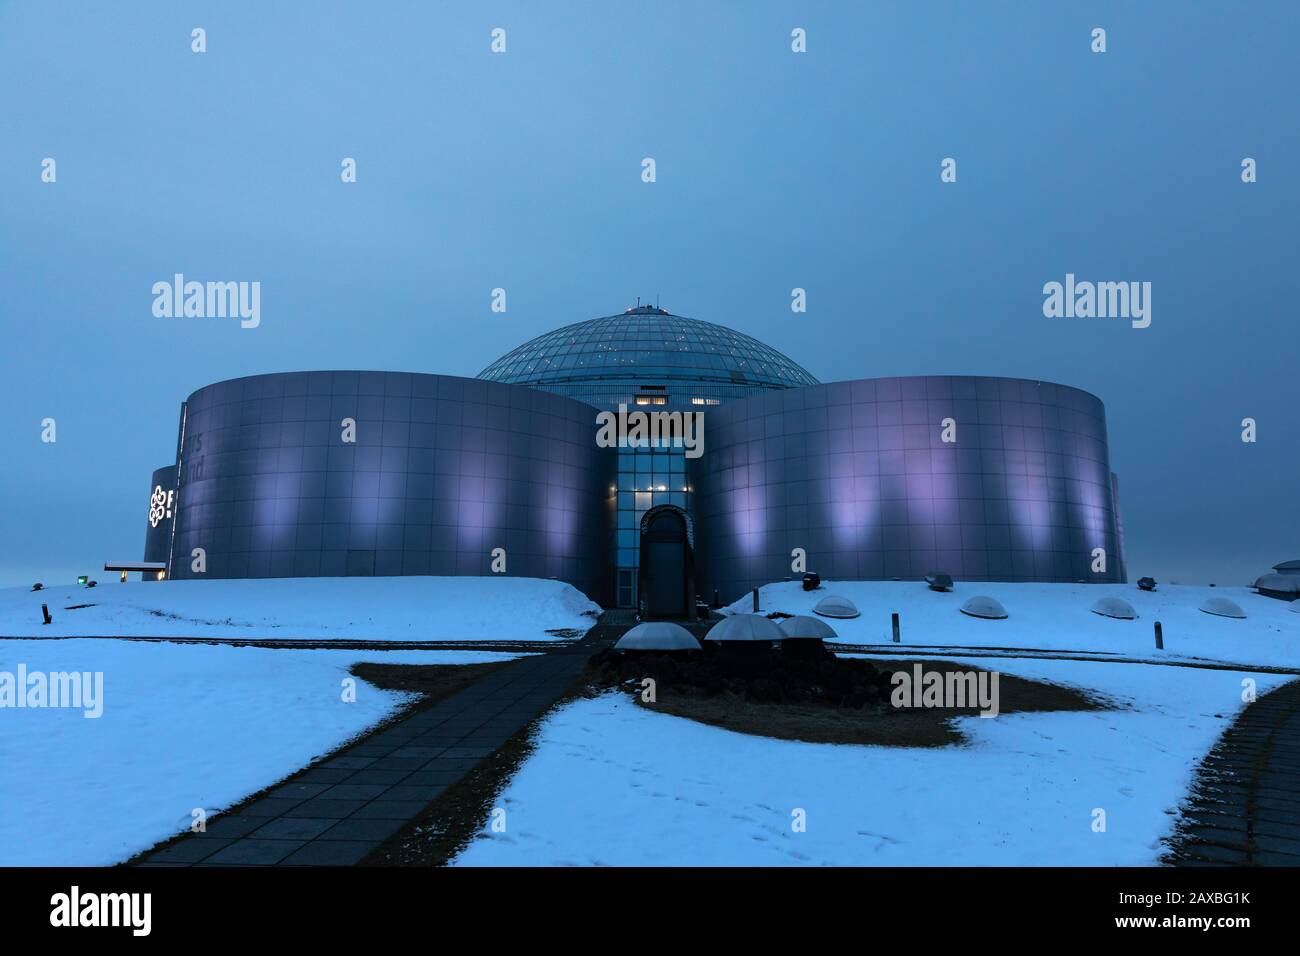 Reykjavik, Iceland - 18 January 2020: The Perlan Museum and Planitarium in Reykjavik. This modern building consists of tanks filled with geothermal wa Stock Photo